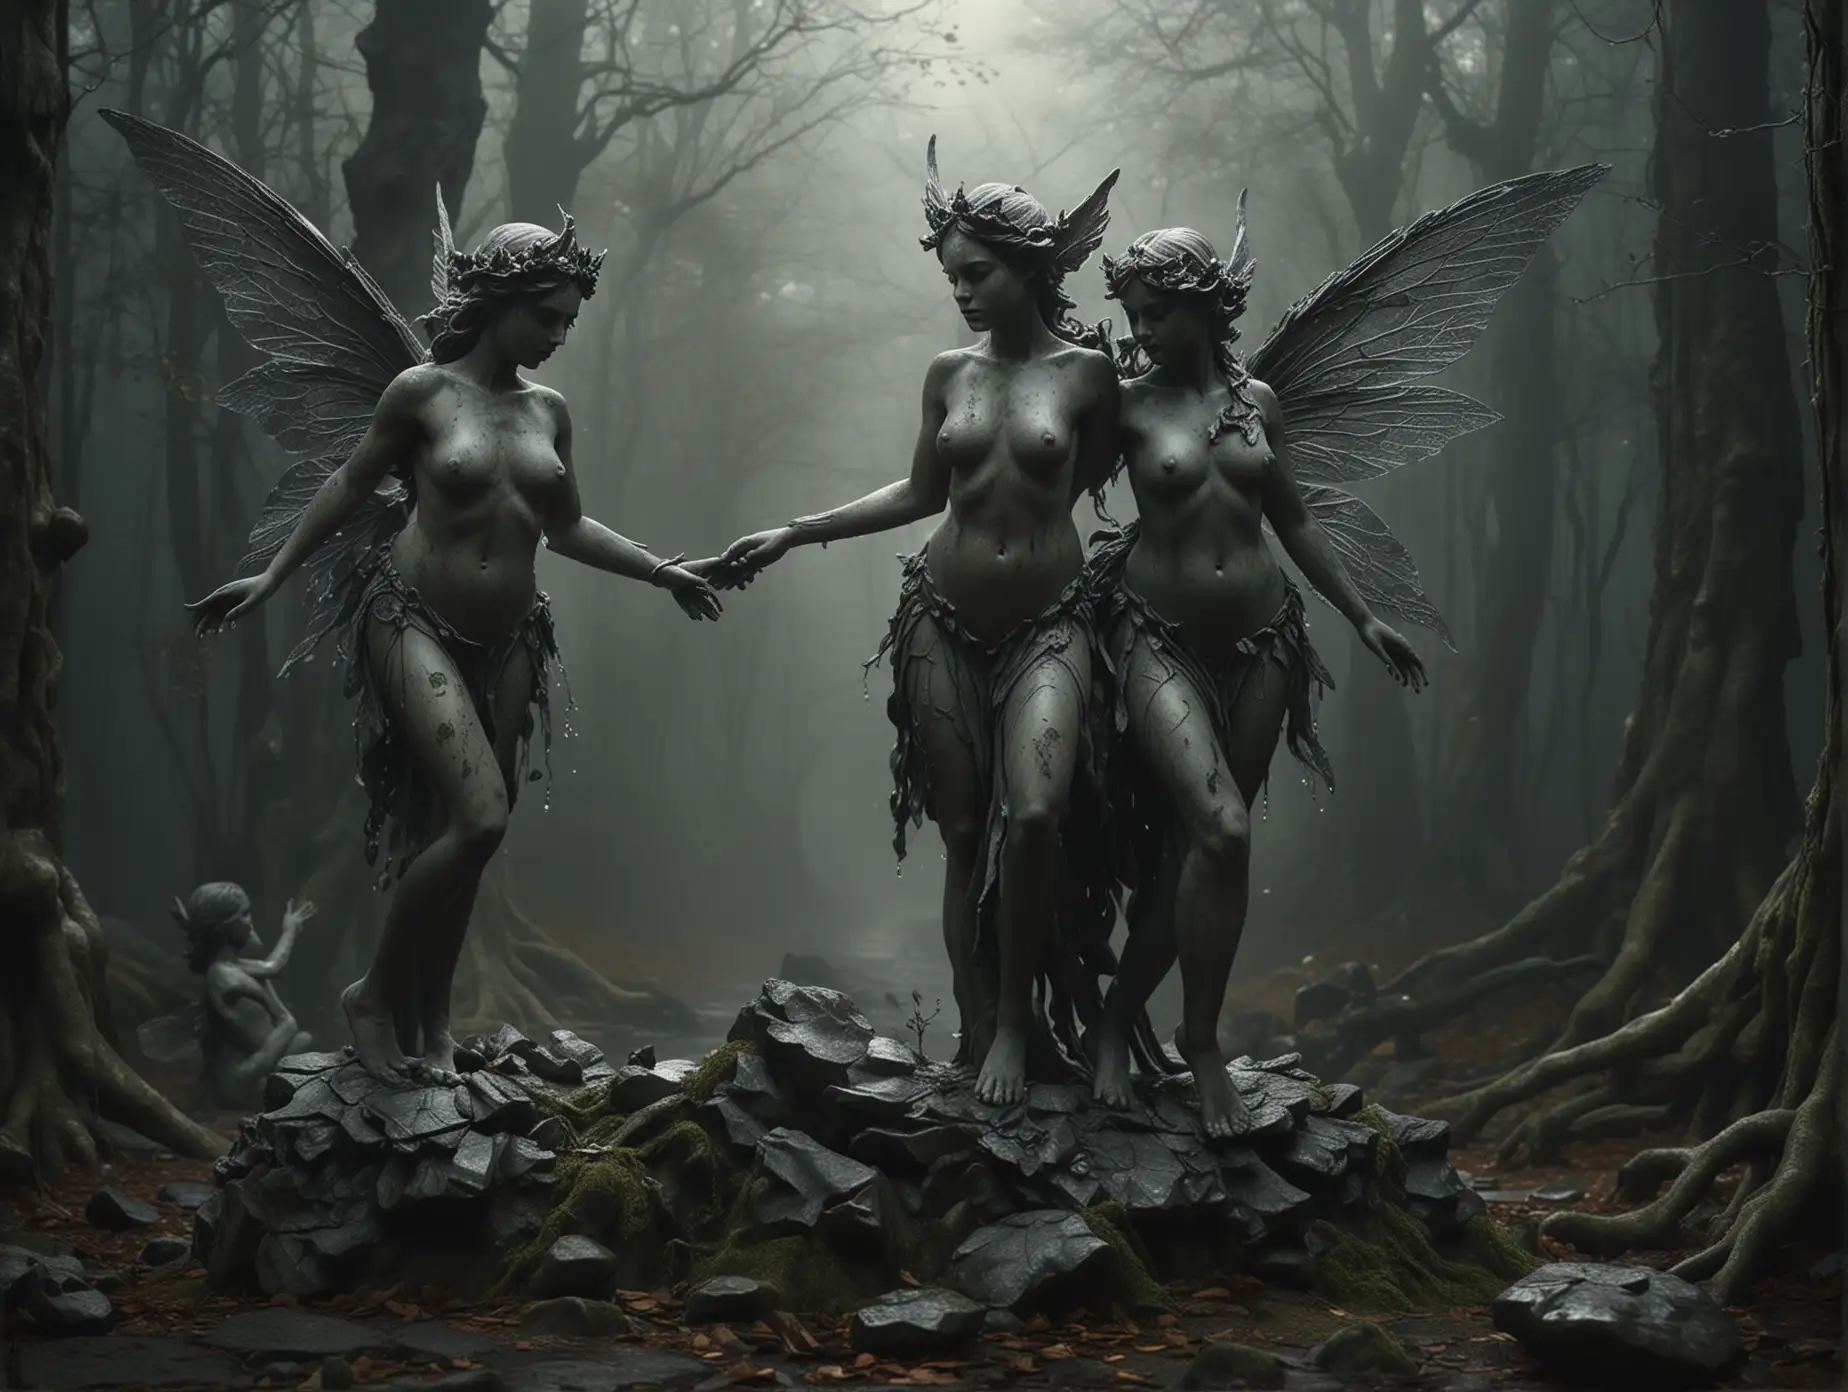 Ethereal Fairies Adorn the Goddess Statue in Enchanted Woodland